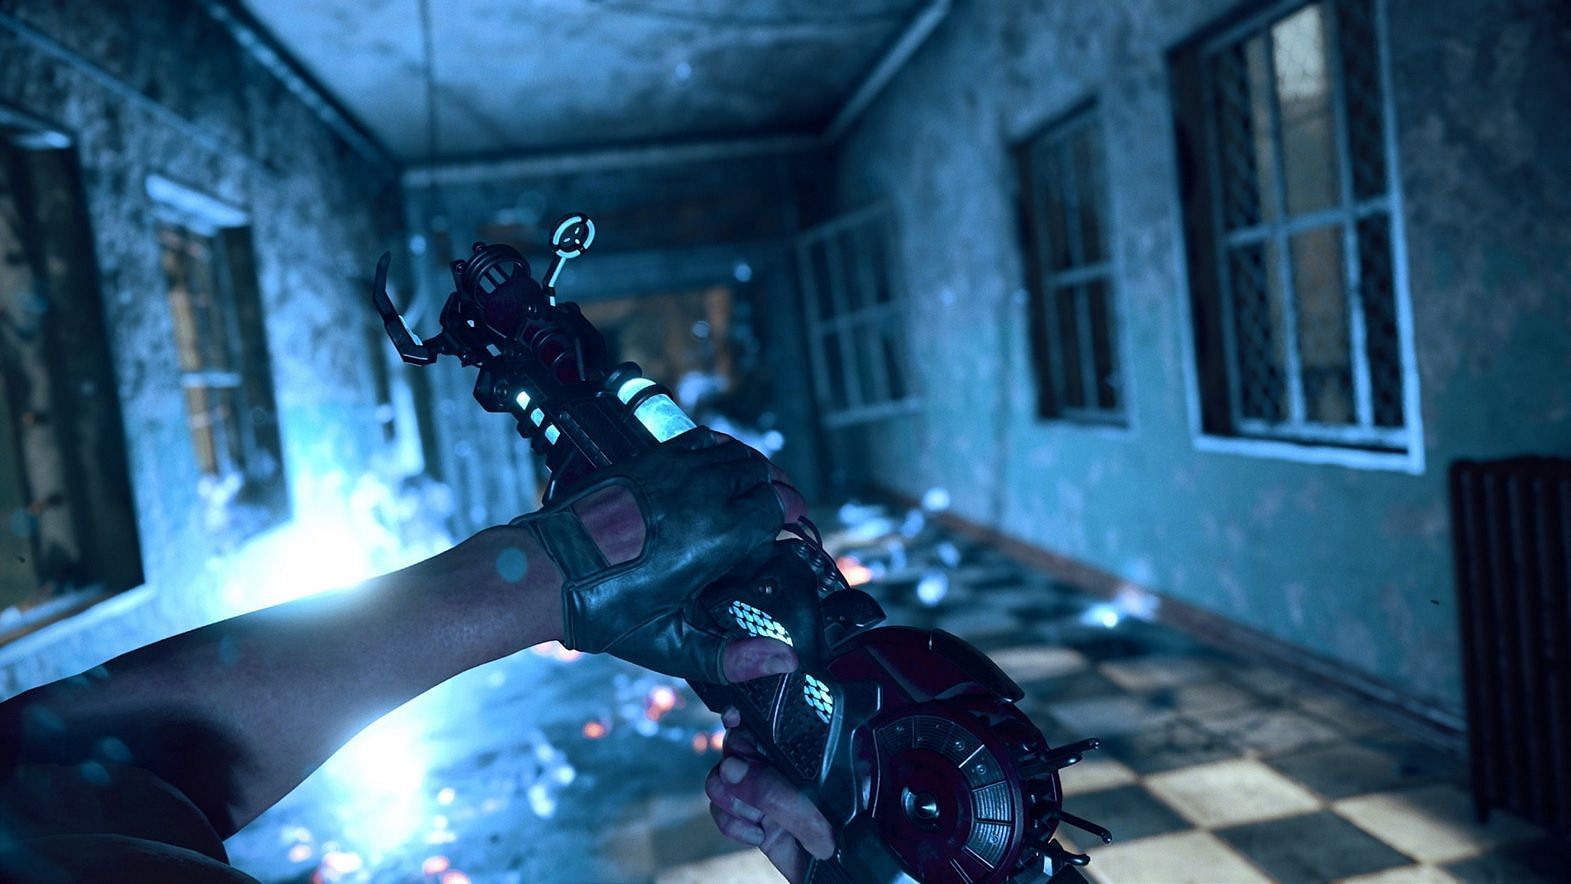 Ray Gun Wonder Weapon as seen in previous CoD games with Zombies modes (Image via Activision)